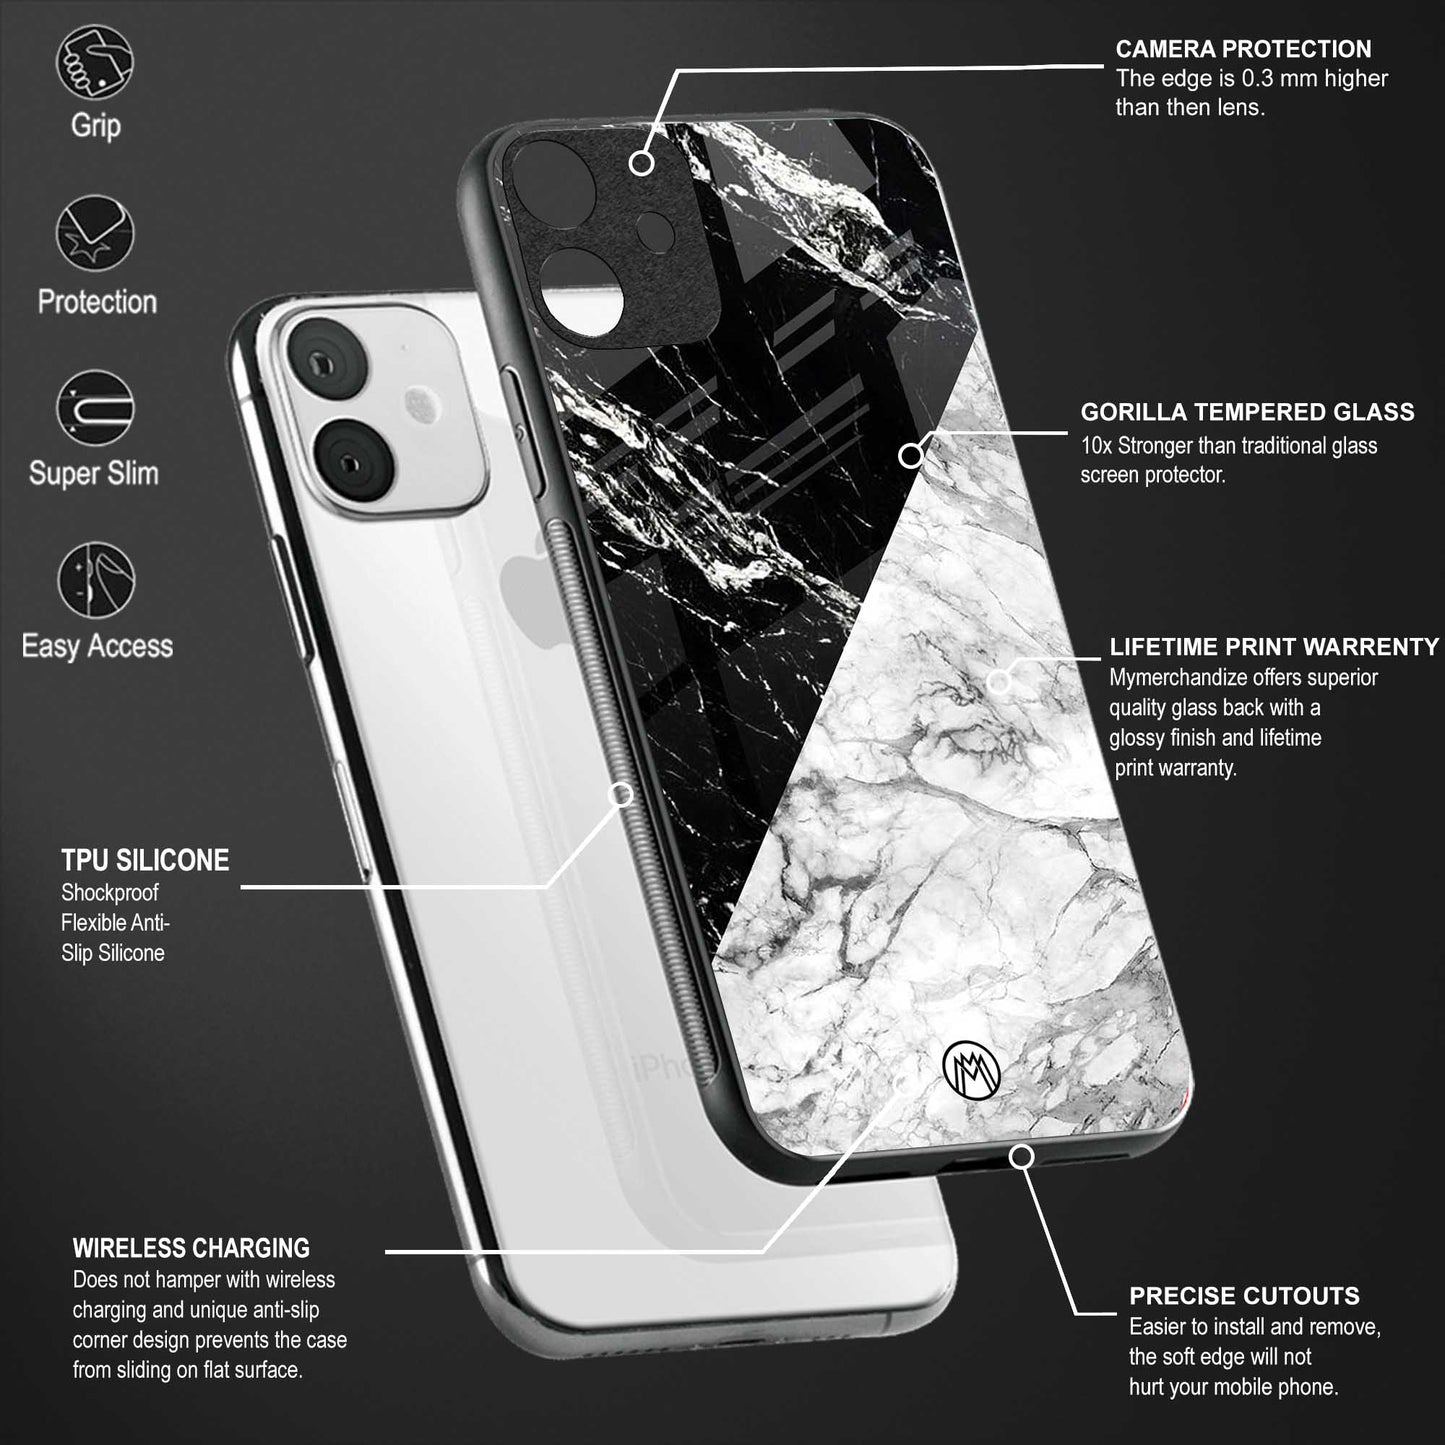 fatal contradiction back phone cover | glass case for vivo y73